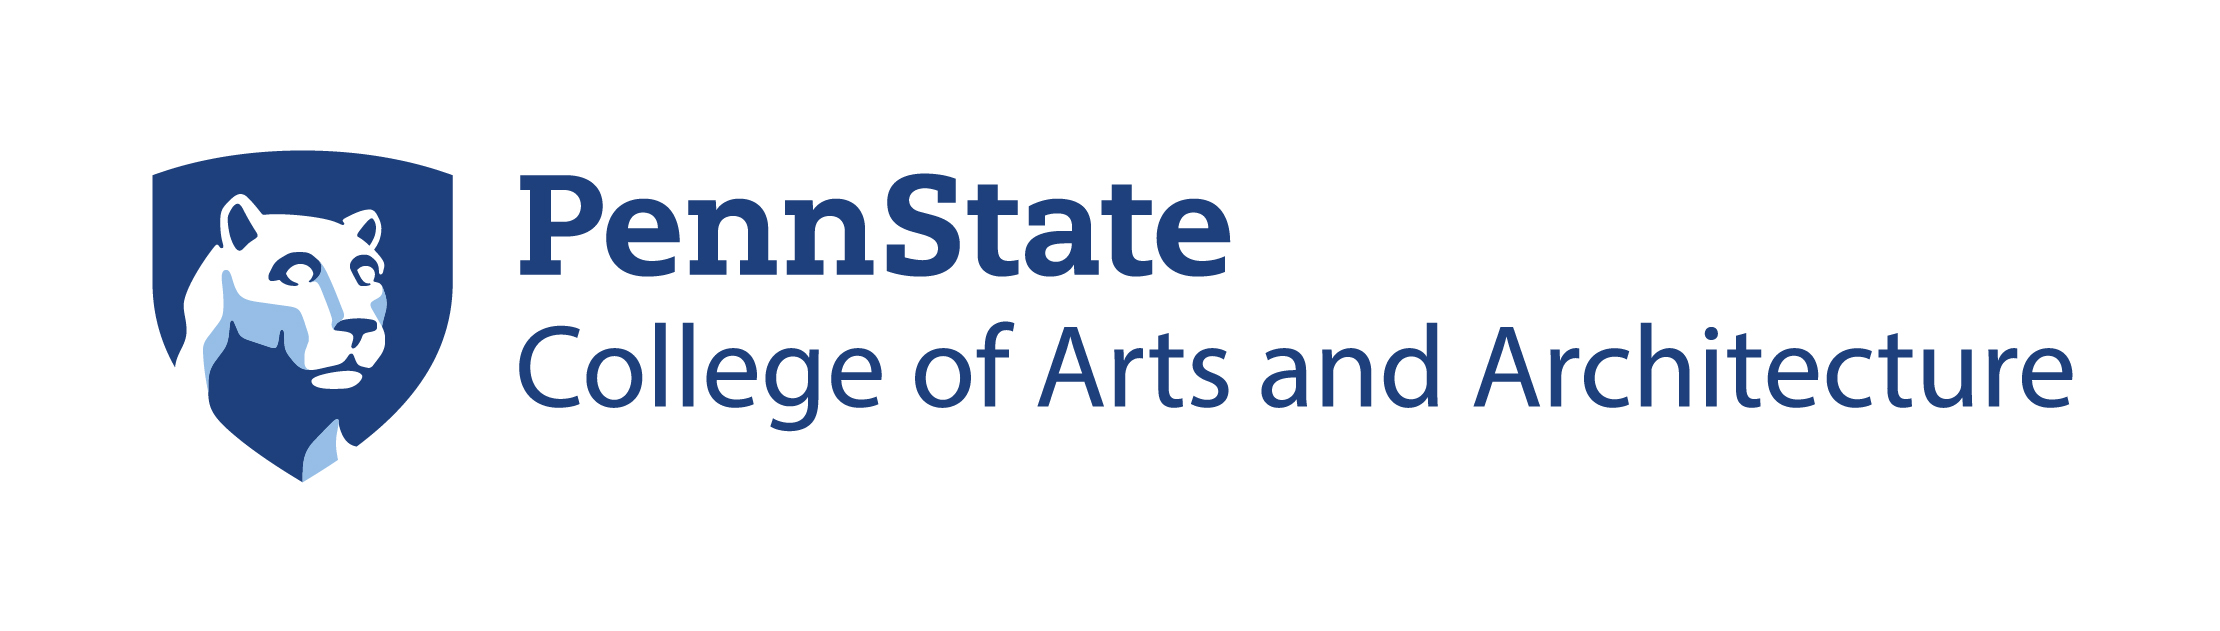 Penn State College of Arts and Architecture